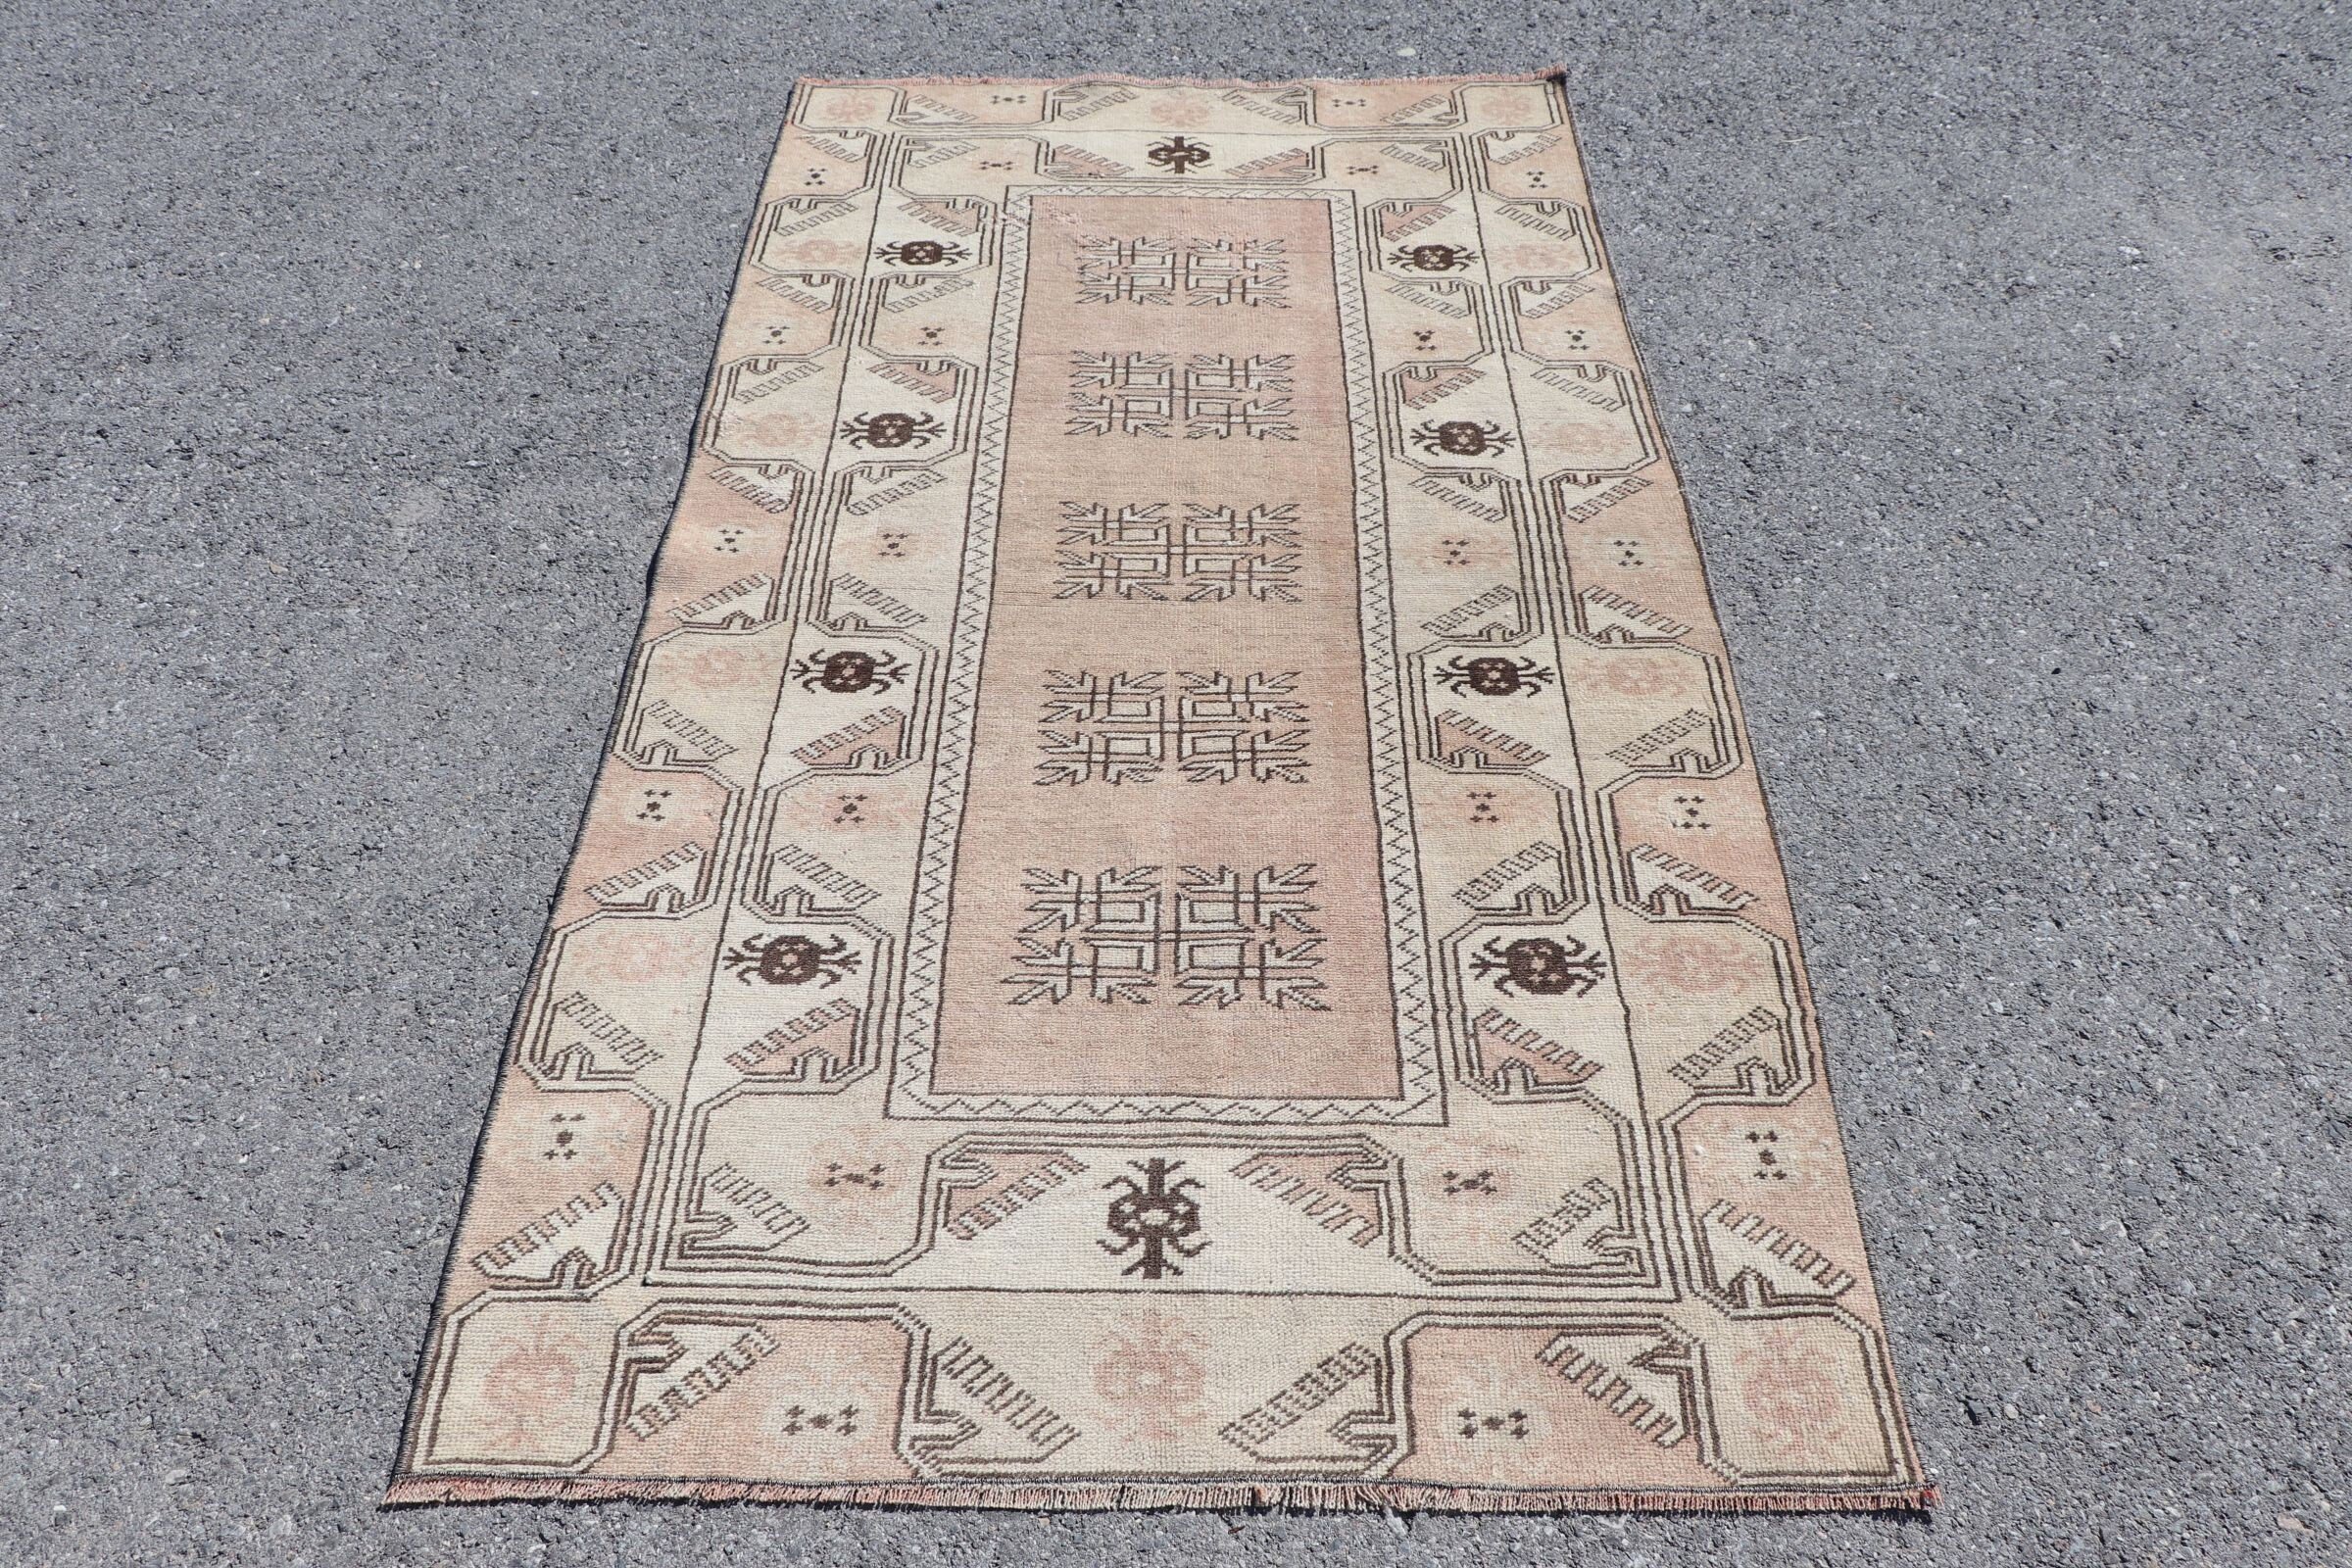 Cool Rug, Vintage Rugs, Kitchen Rug, Turkish Rugs, Retro Rug, Beige Bedroom Rug, Rugs for Entry, Oushak Rug, 3.5x6.5 ft Accent Rugs